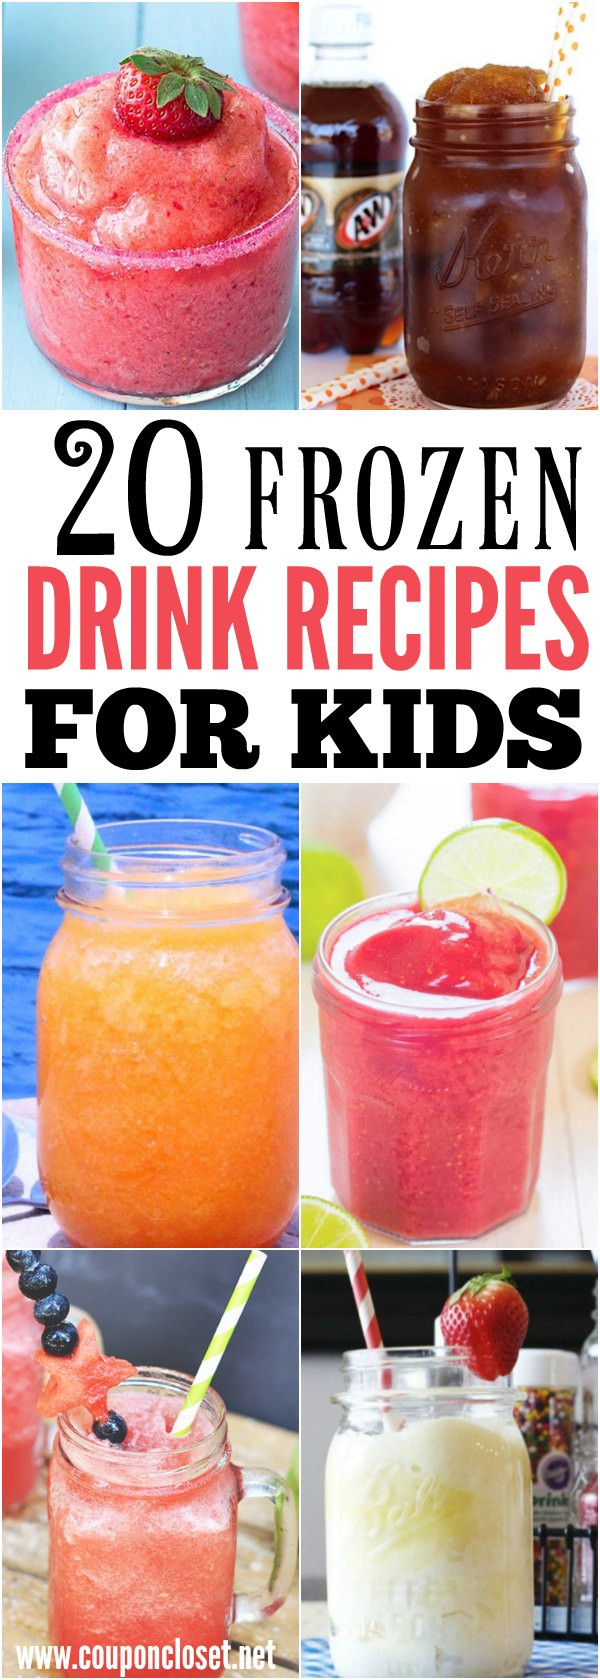 Easy Drink Recipes For Kids
 Kid Friendly Frozen Drink Recipes 20 Recipes to cool